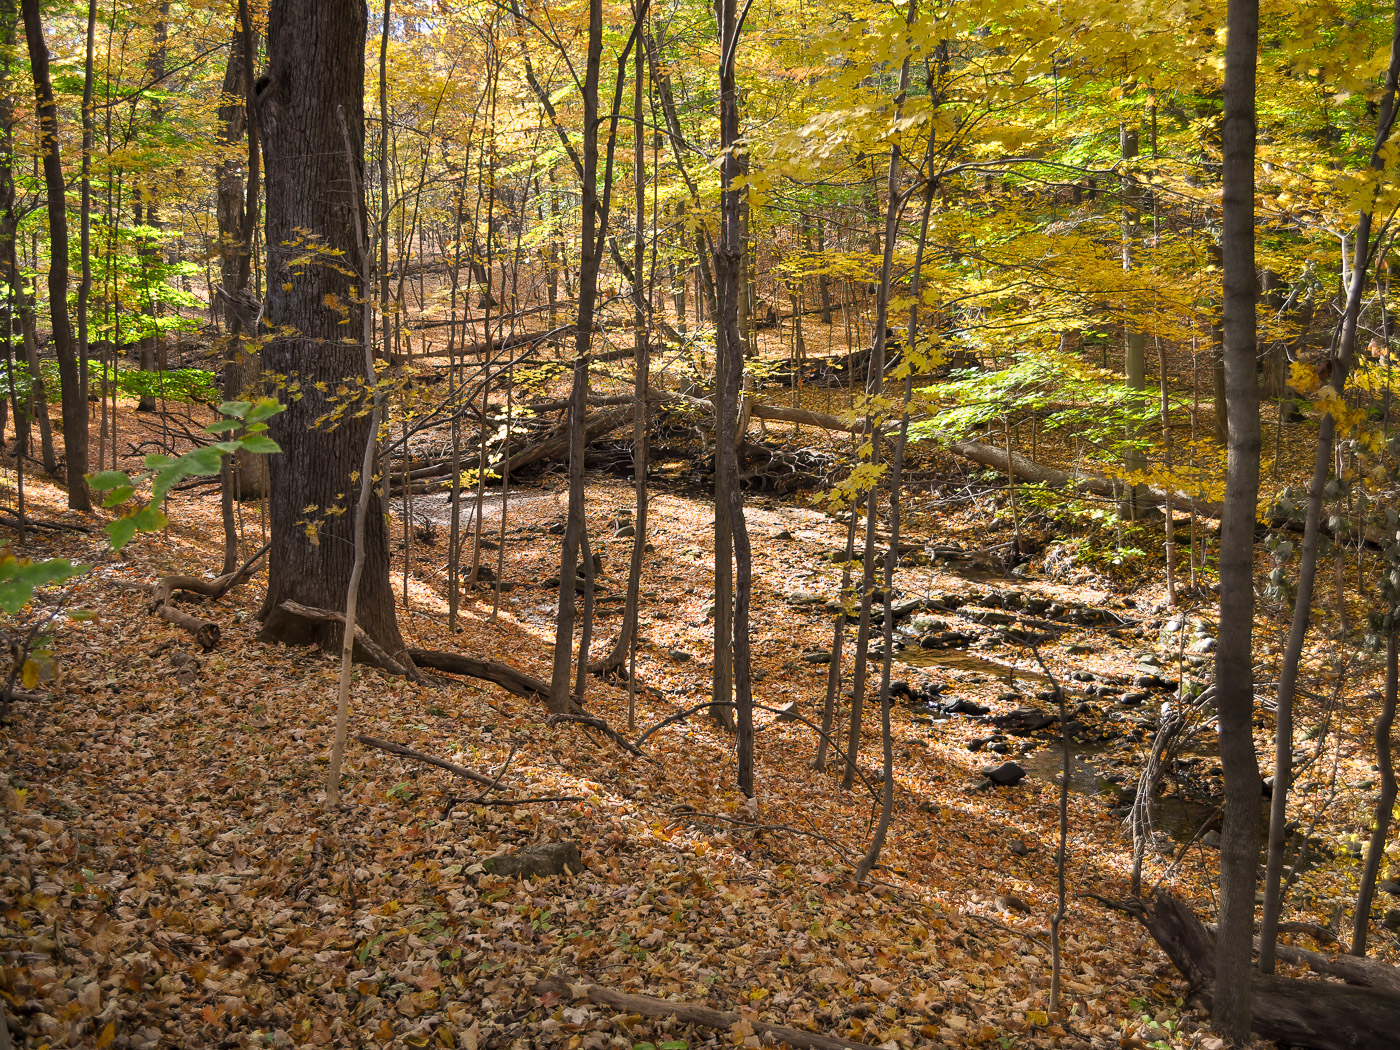 A healthy woodland ecosystem relies on the natural recycling of its leaves.